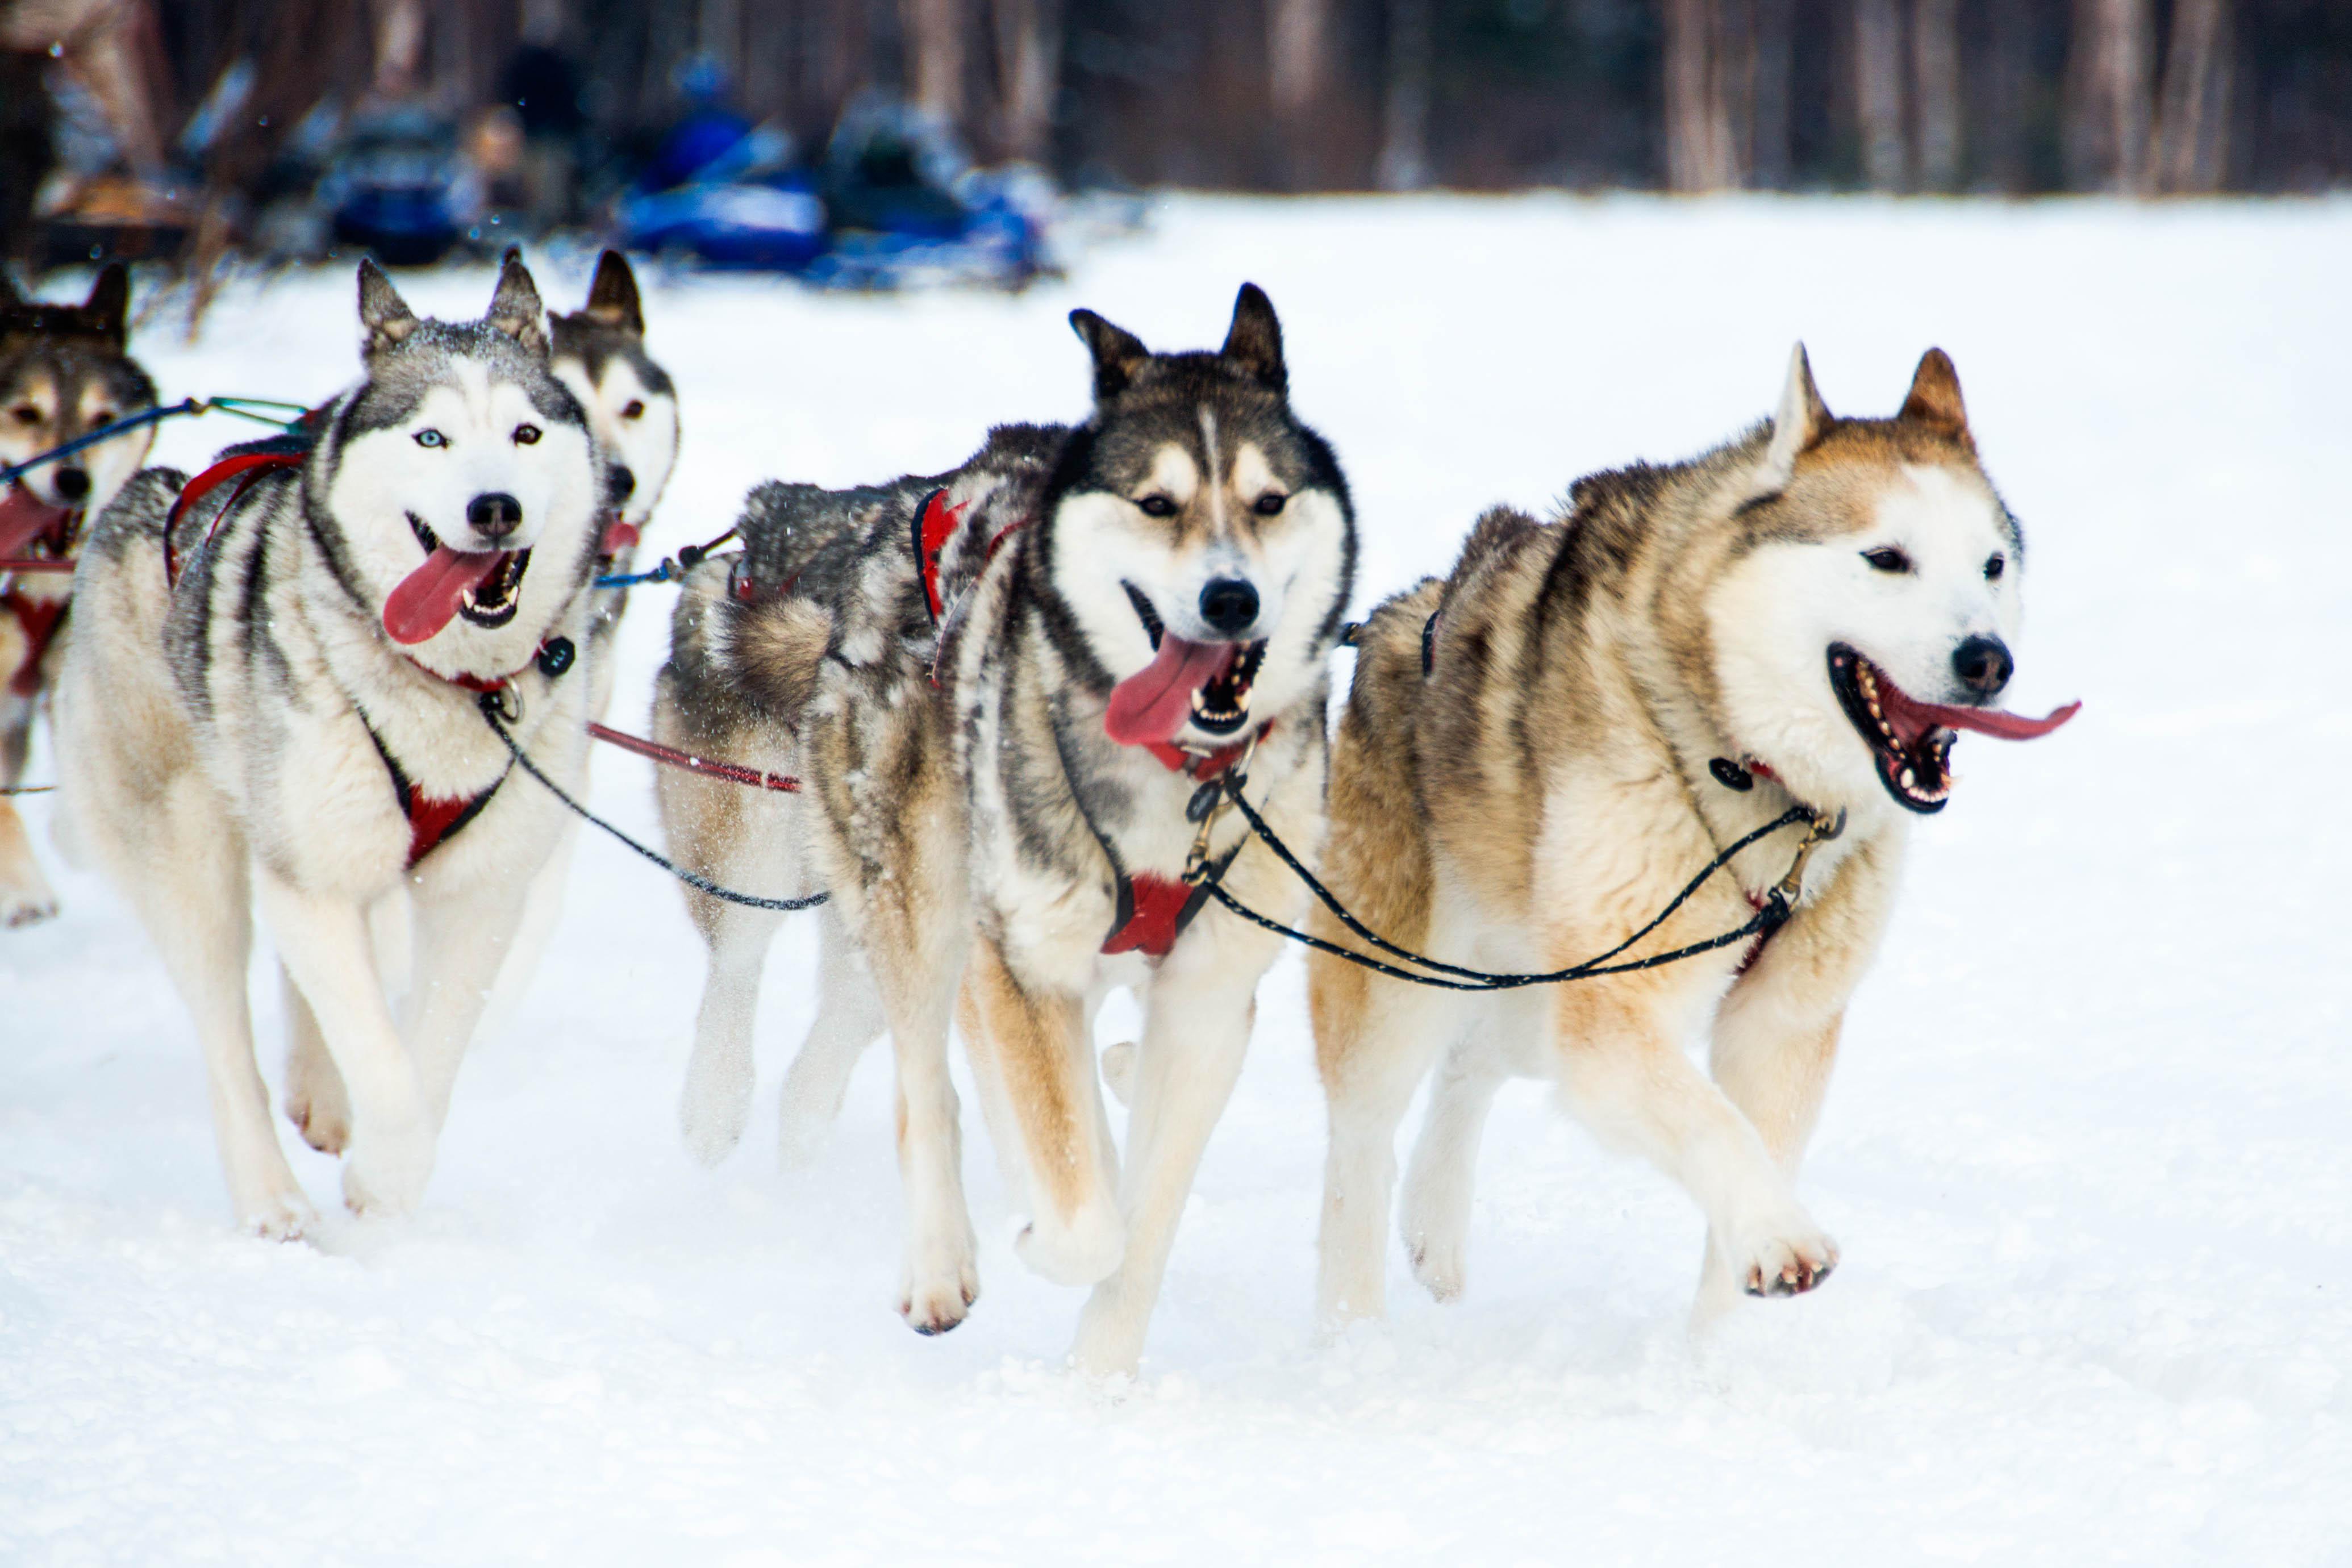 Watch the Iditarod start and then experience the thrill for yourself by taking a dog sledding tour